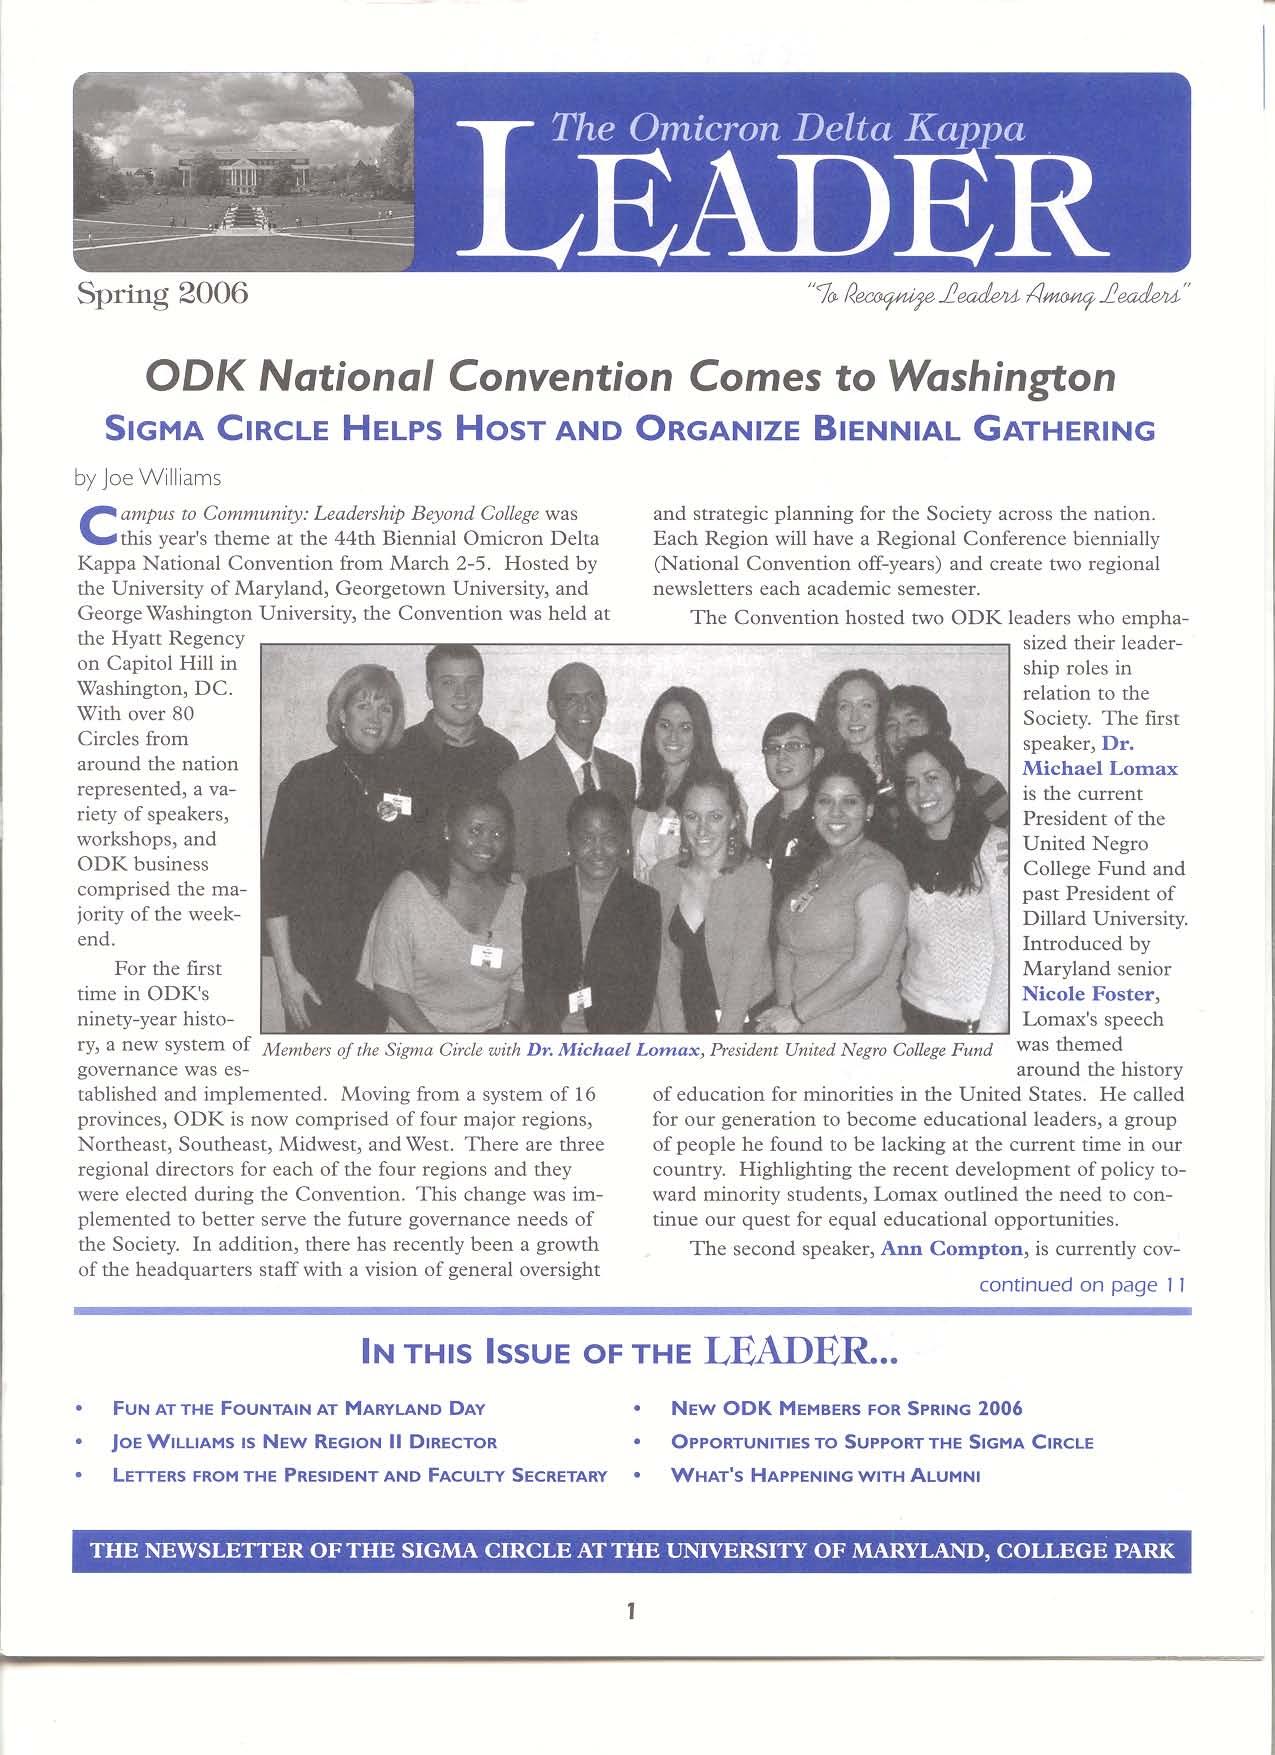 Front cover of Spring 2006 Newsletter